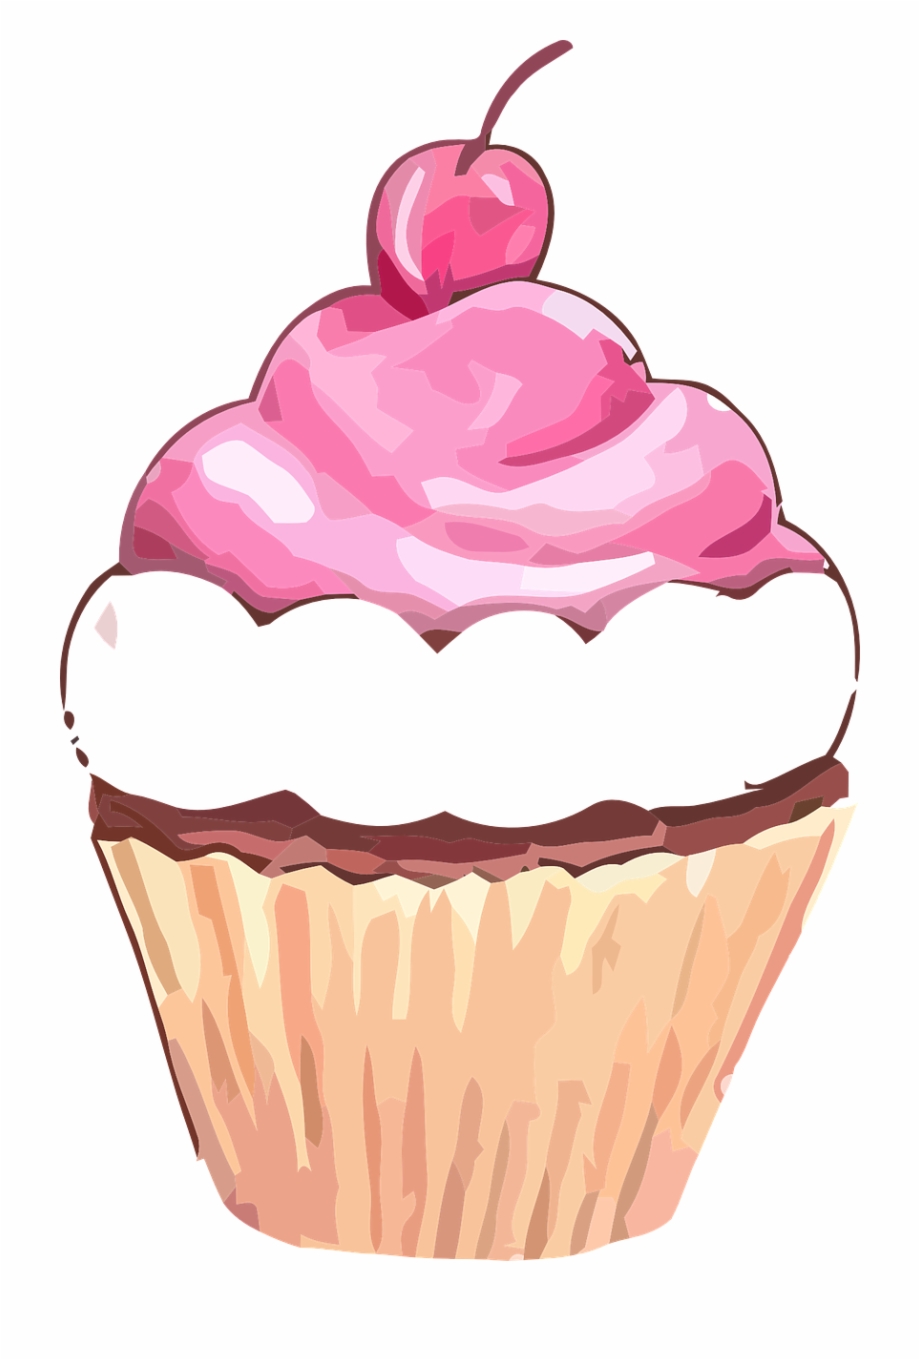 Cupcake clipart fruit. Free png images download